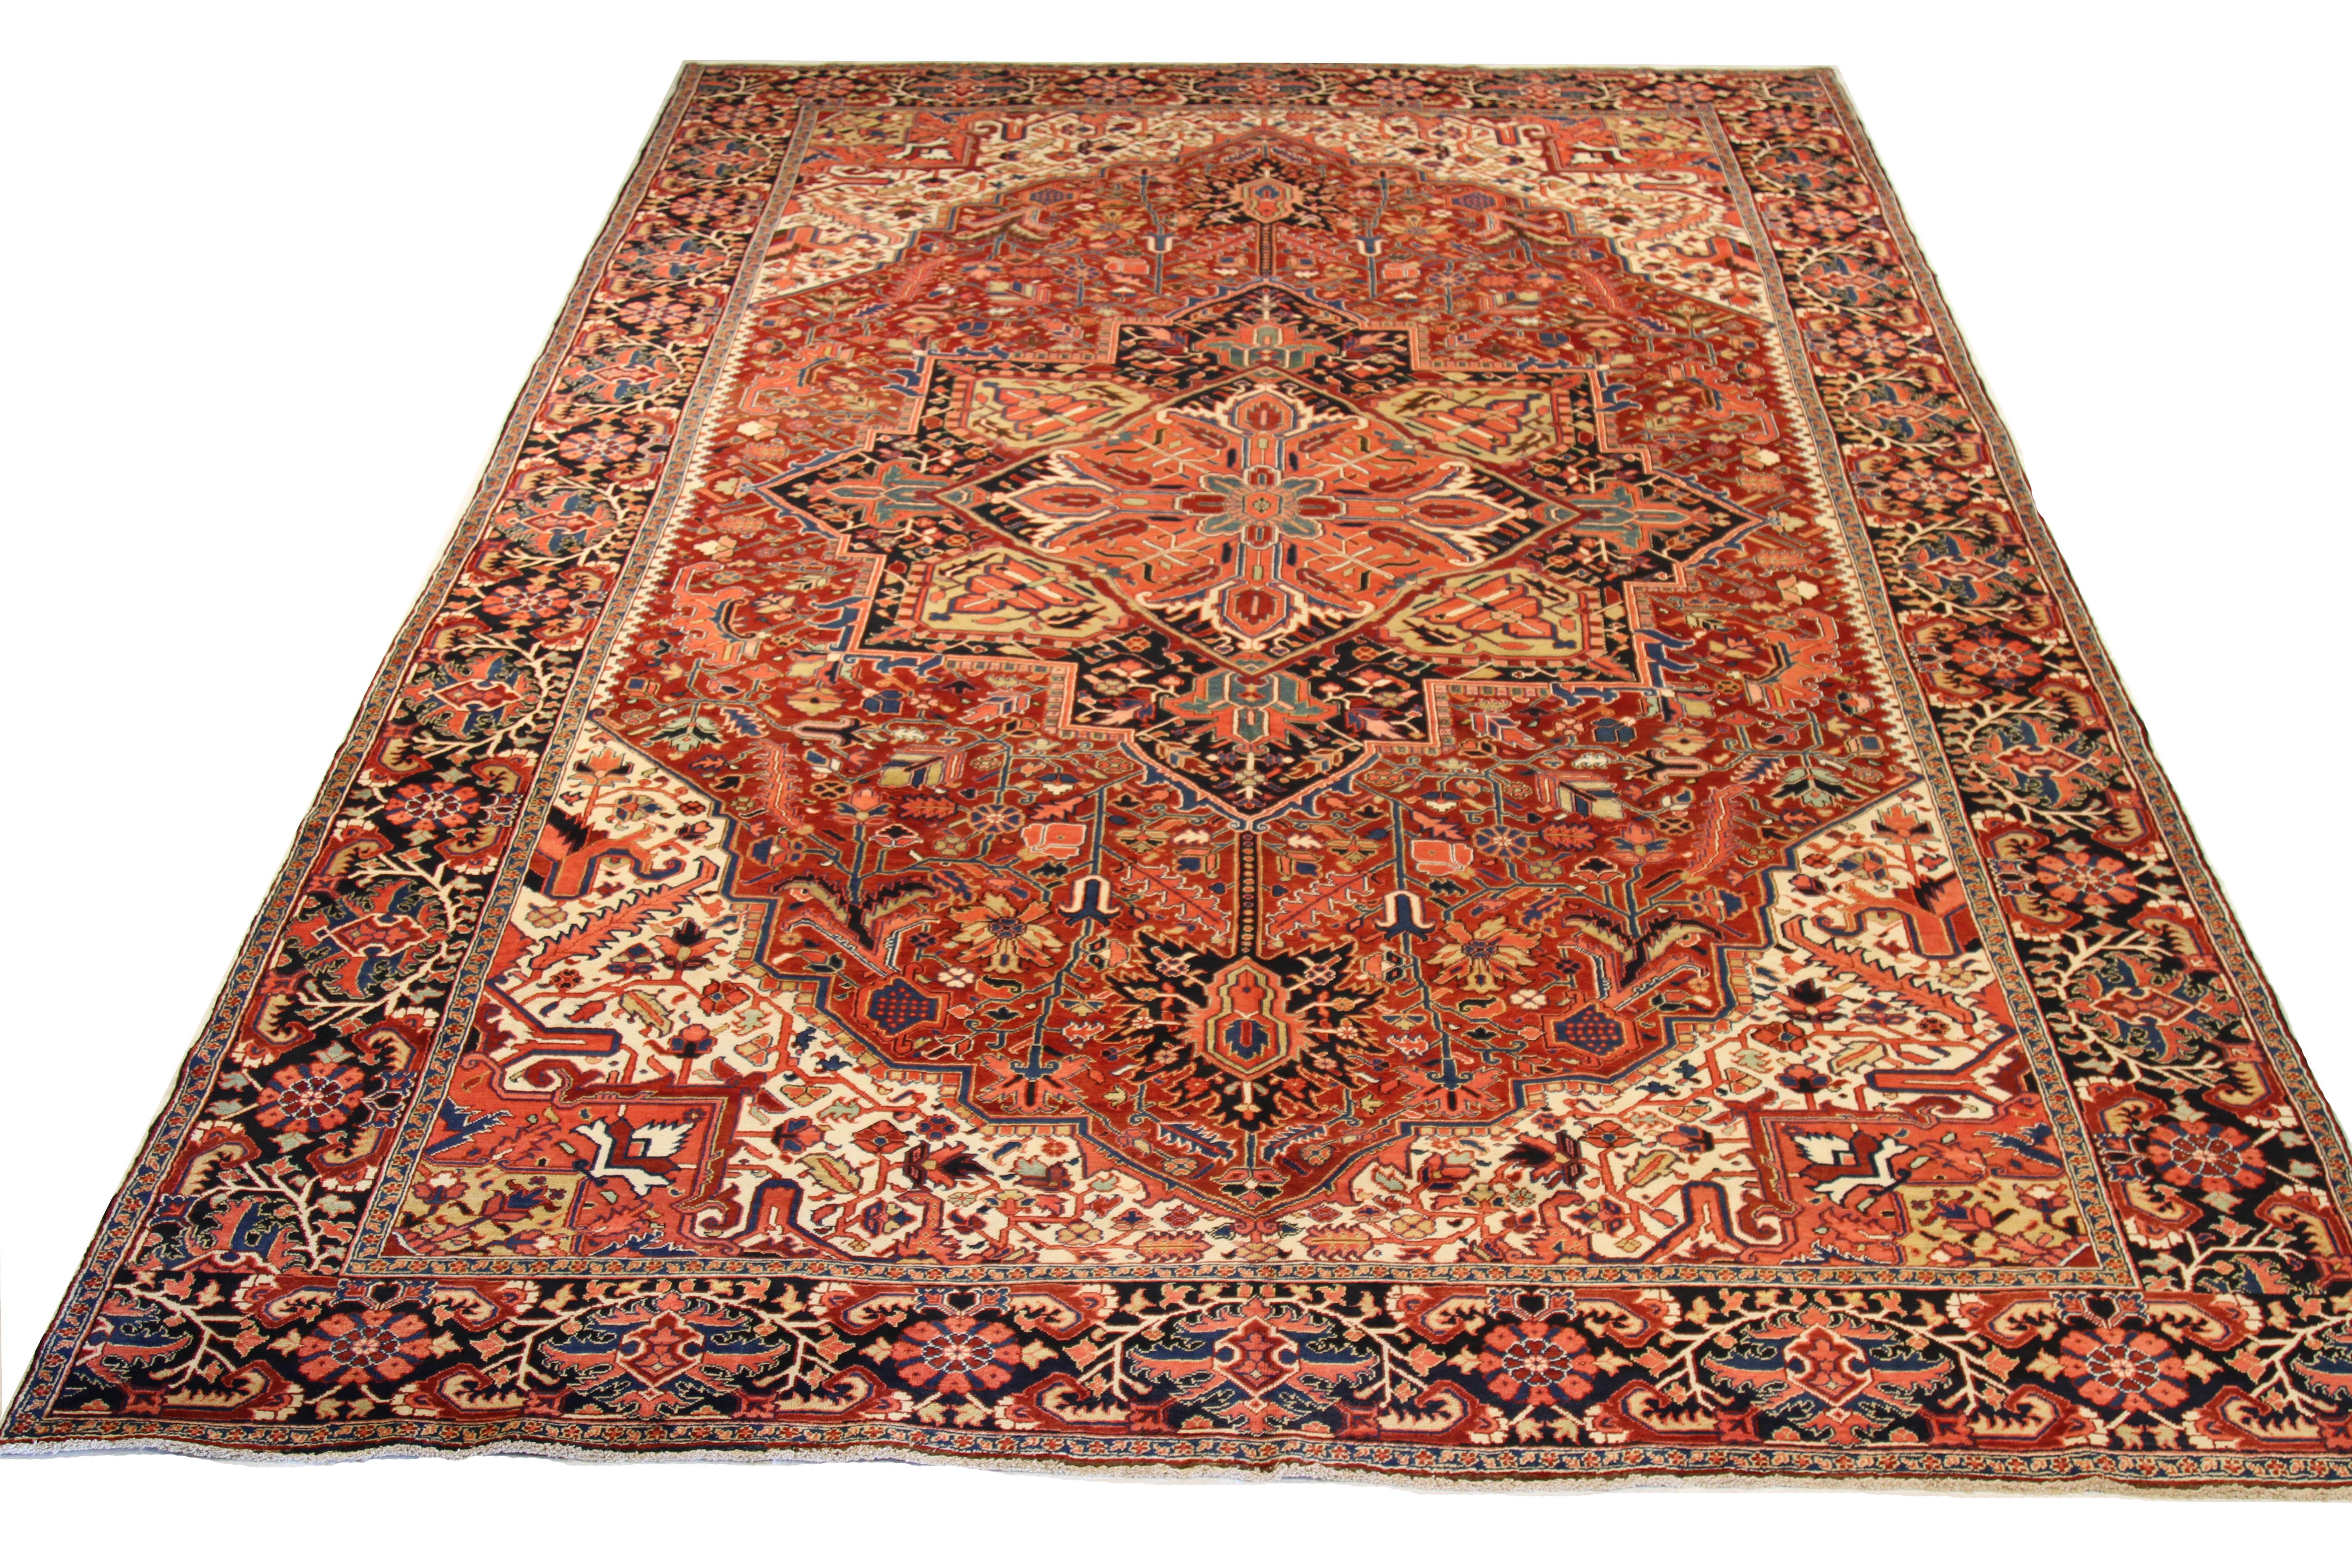 Large early 20th-century hand knotted Persian area rug made from fine wool and all-natural vegetable dyes that are safe for people and pets. This beautiful piece features ornate floral patterns in various colors which Heriz rugs are known for.